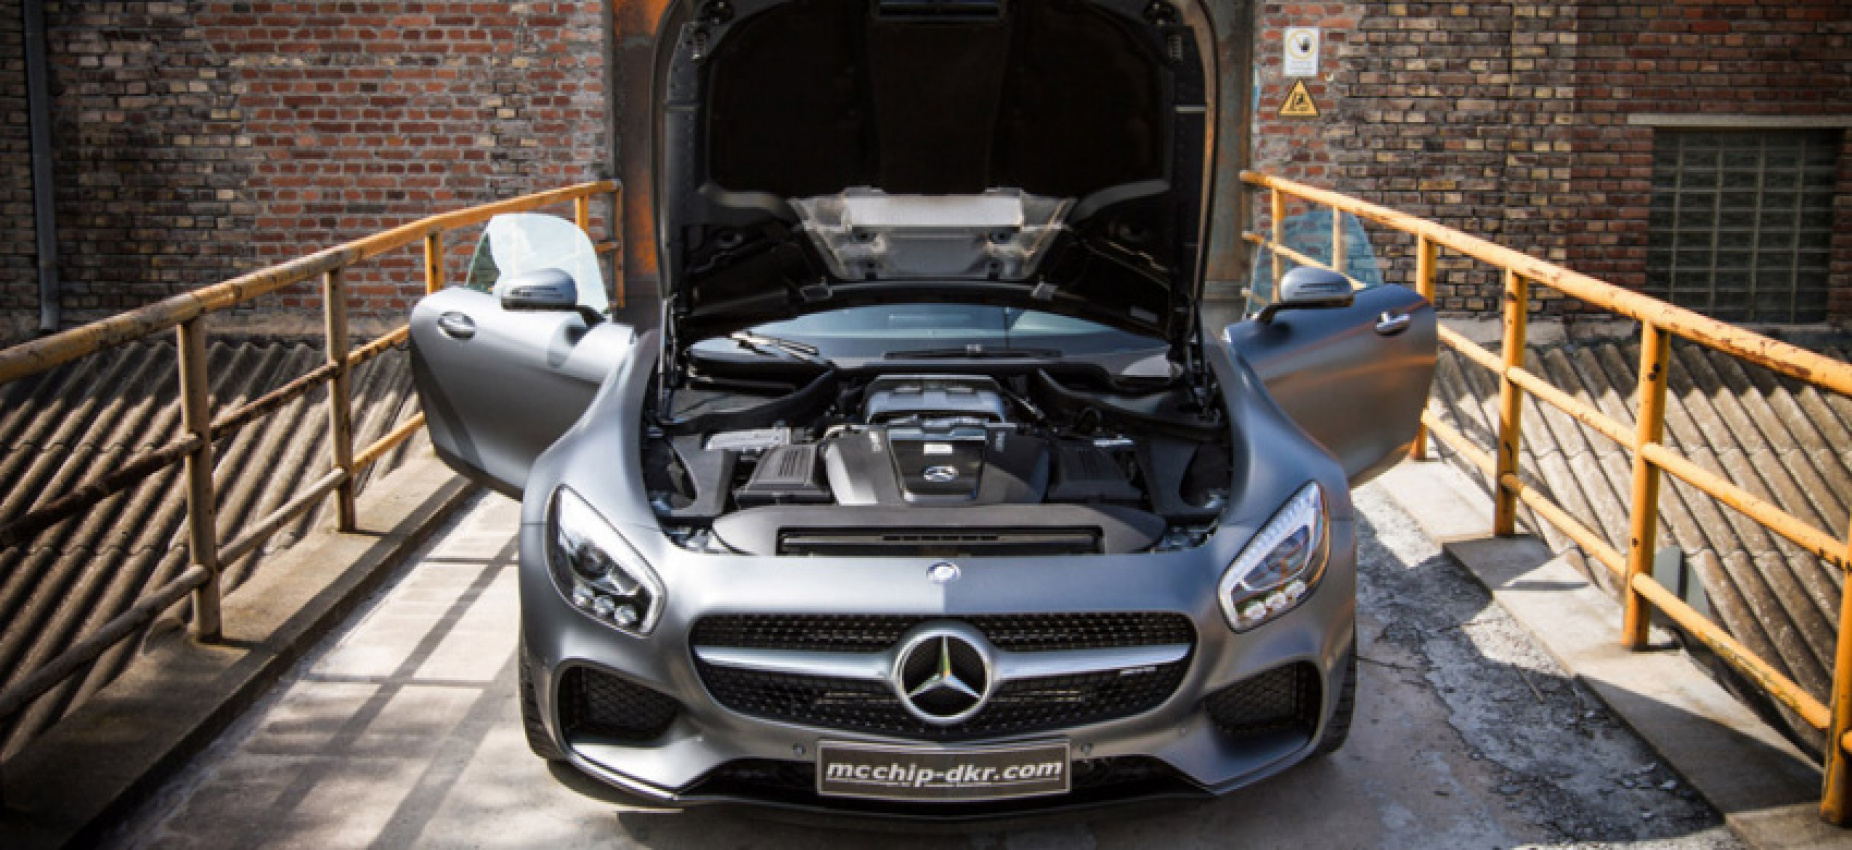 autos, cars, mercedes-benz, mg, mercedes, mcchip-dkr mercedes-amg gt s likes nothing stocks